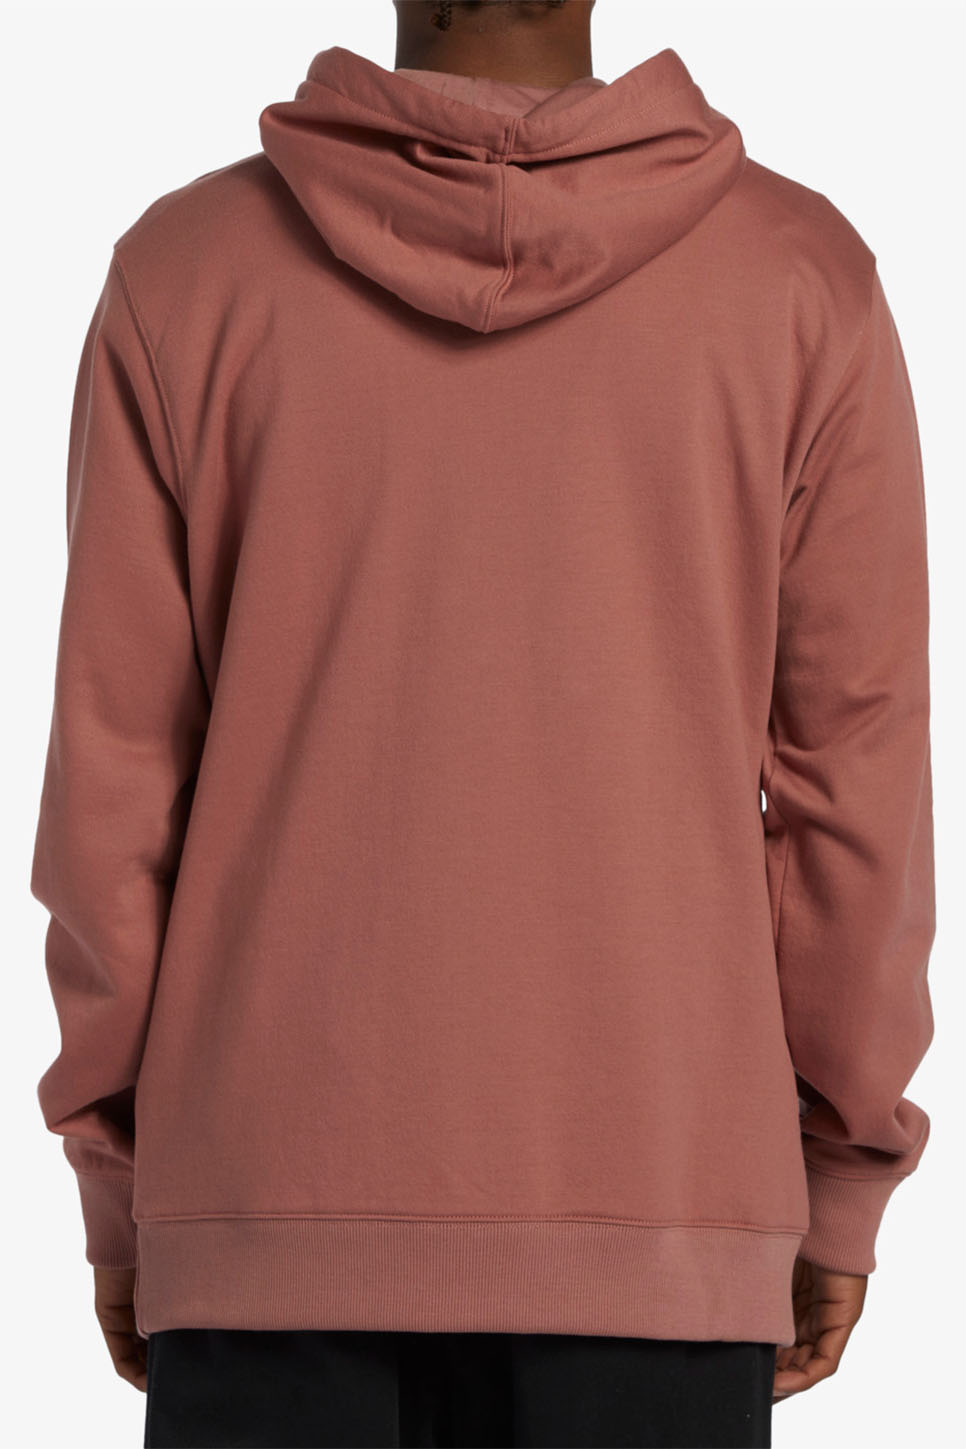 Billabong - All Day PO Hoodie - Rosewood - Back